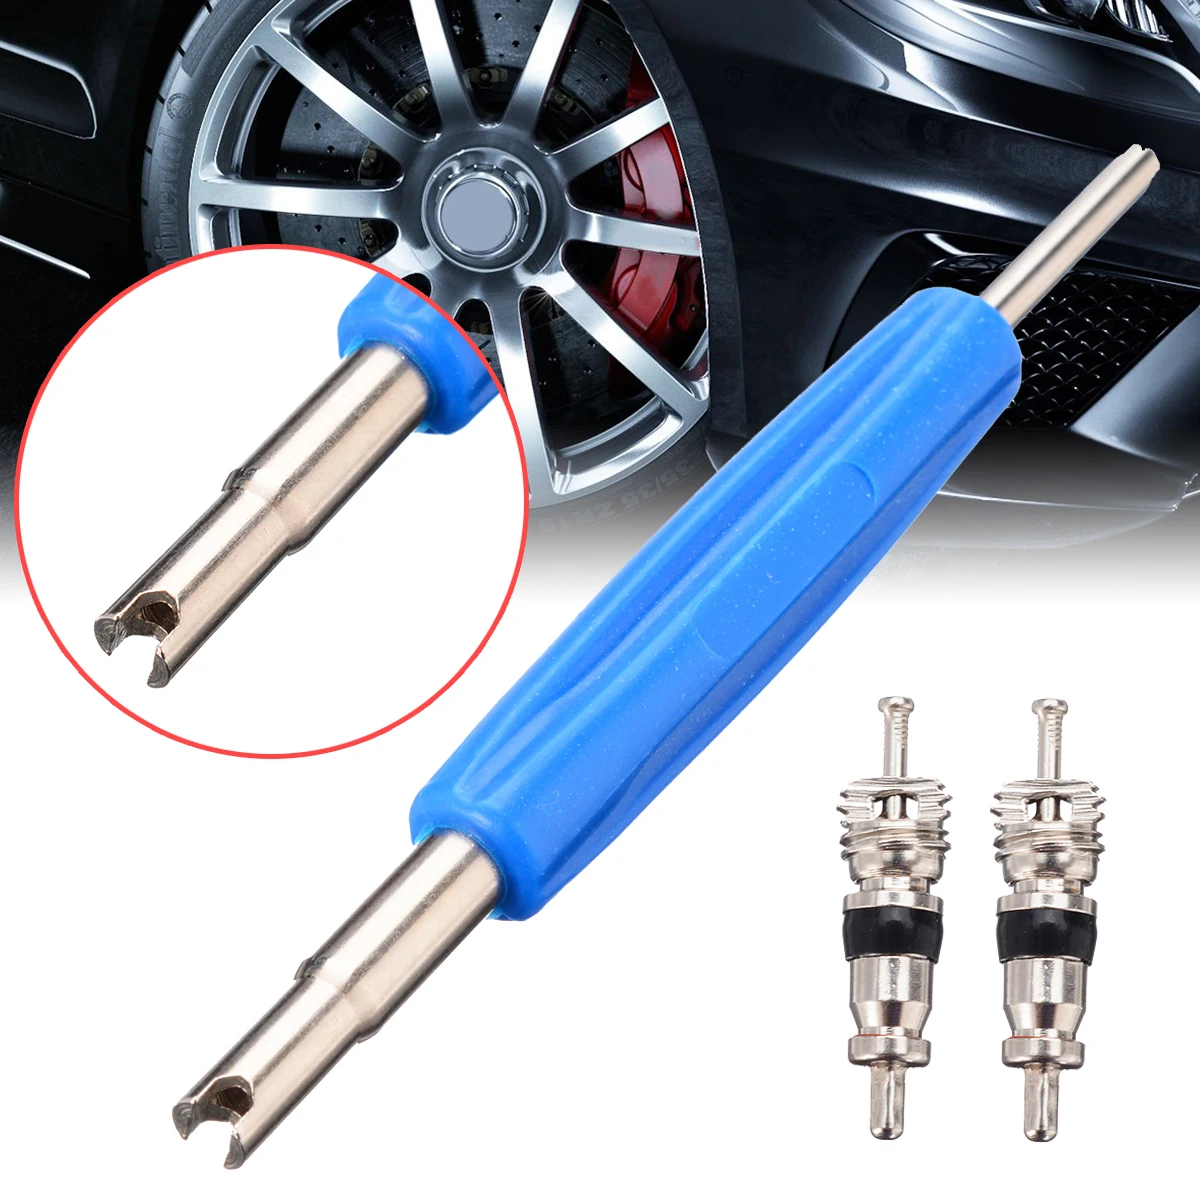 5 x 2-Way Tyre Valve PIN Remover Easy To Use Portable Tool Tire Motorcycle Car